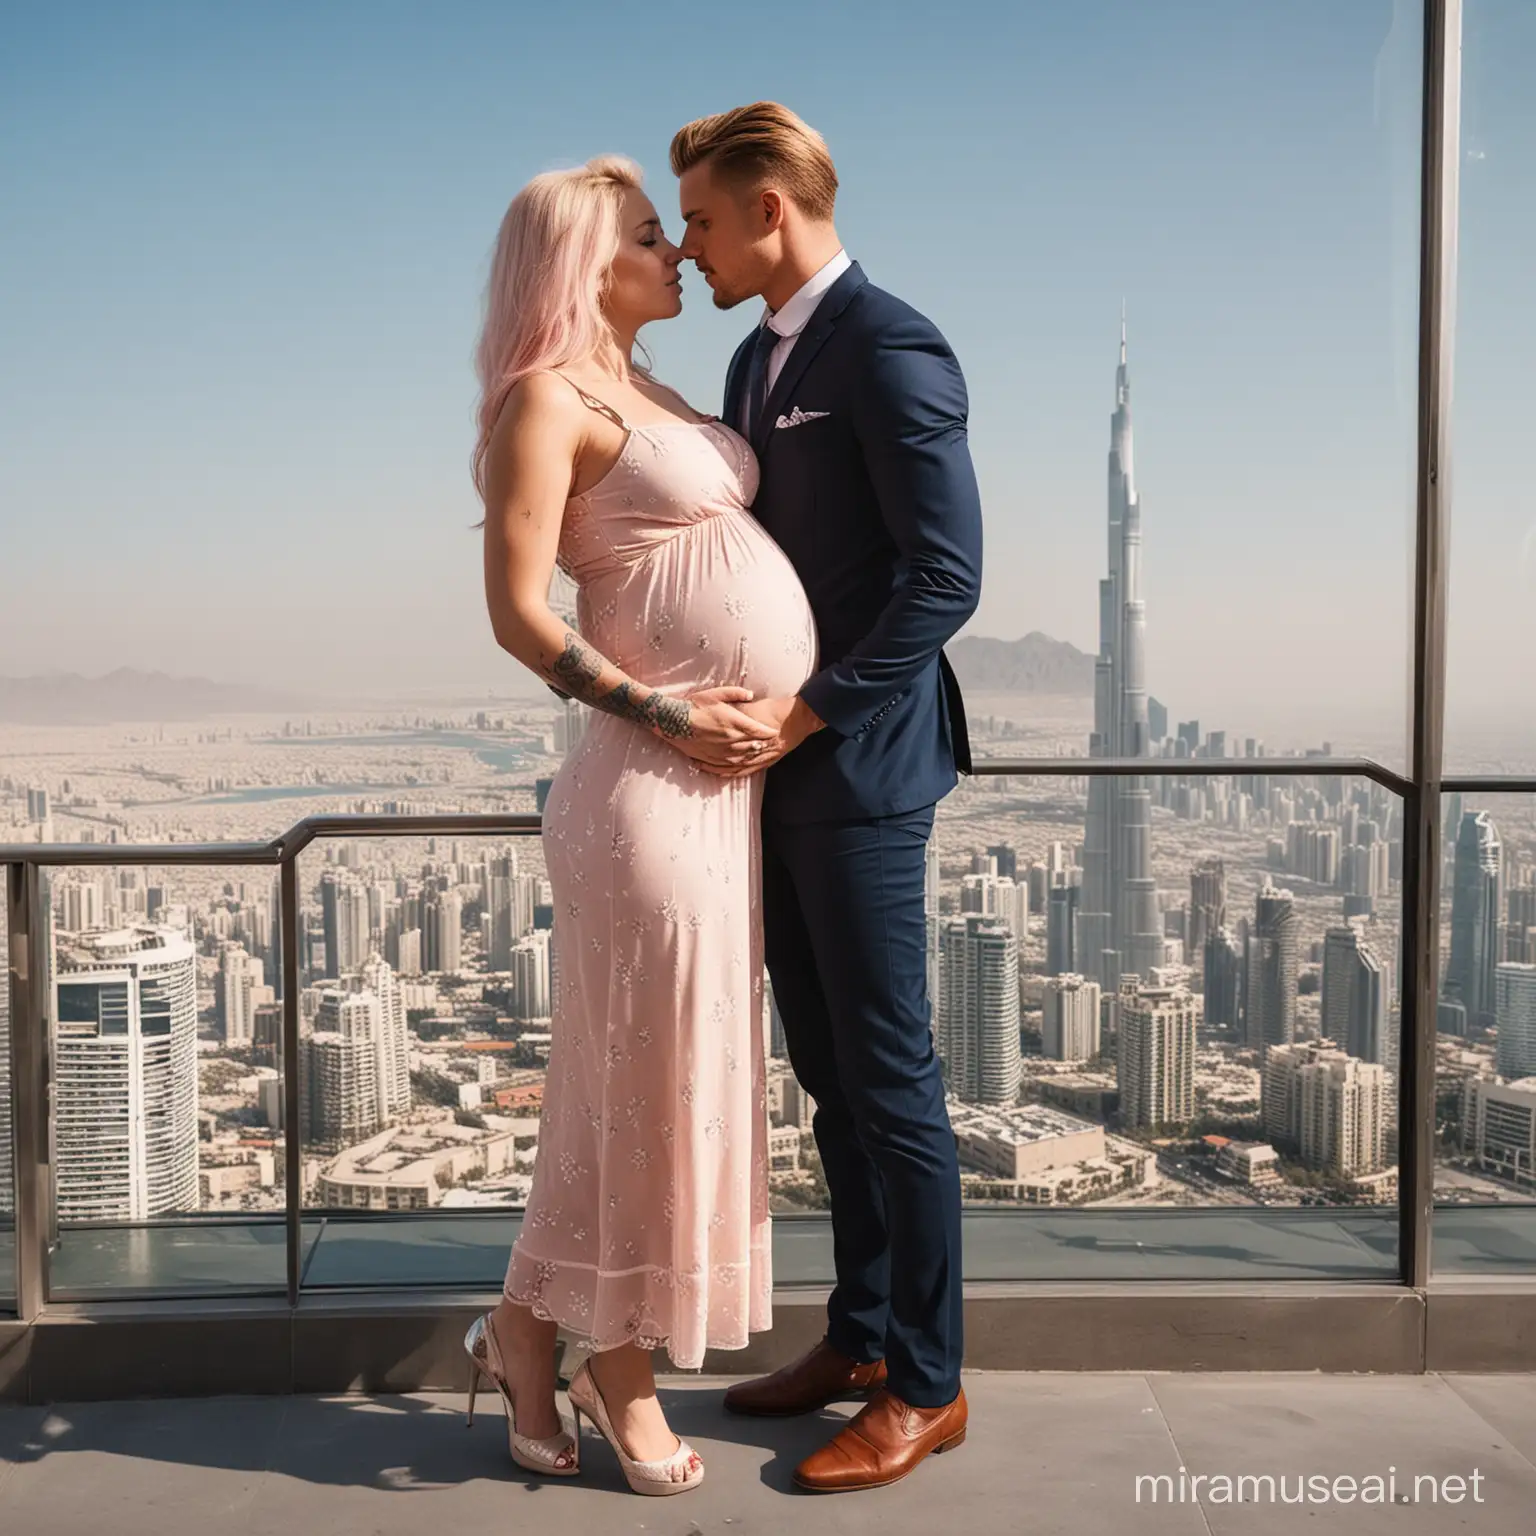 Generate a very attractive sexy pregnant girl with her husband. The girl has blonde and pink hair and blue eyes.Her husband is so tall that even if she wears high heels, she is taller. The man has light brown and blond hair, blue eyes ,His belly is very muscular and square , and a tattoo on his arm. The woman is wearing a sexy dress and high heels. The two of them are kissing and in the background there is a huge mountain ( moant Everest ), Pesific Ocean and a huge skyscraper (Burj Kalifa ).